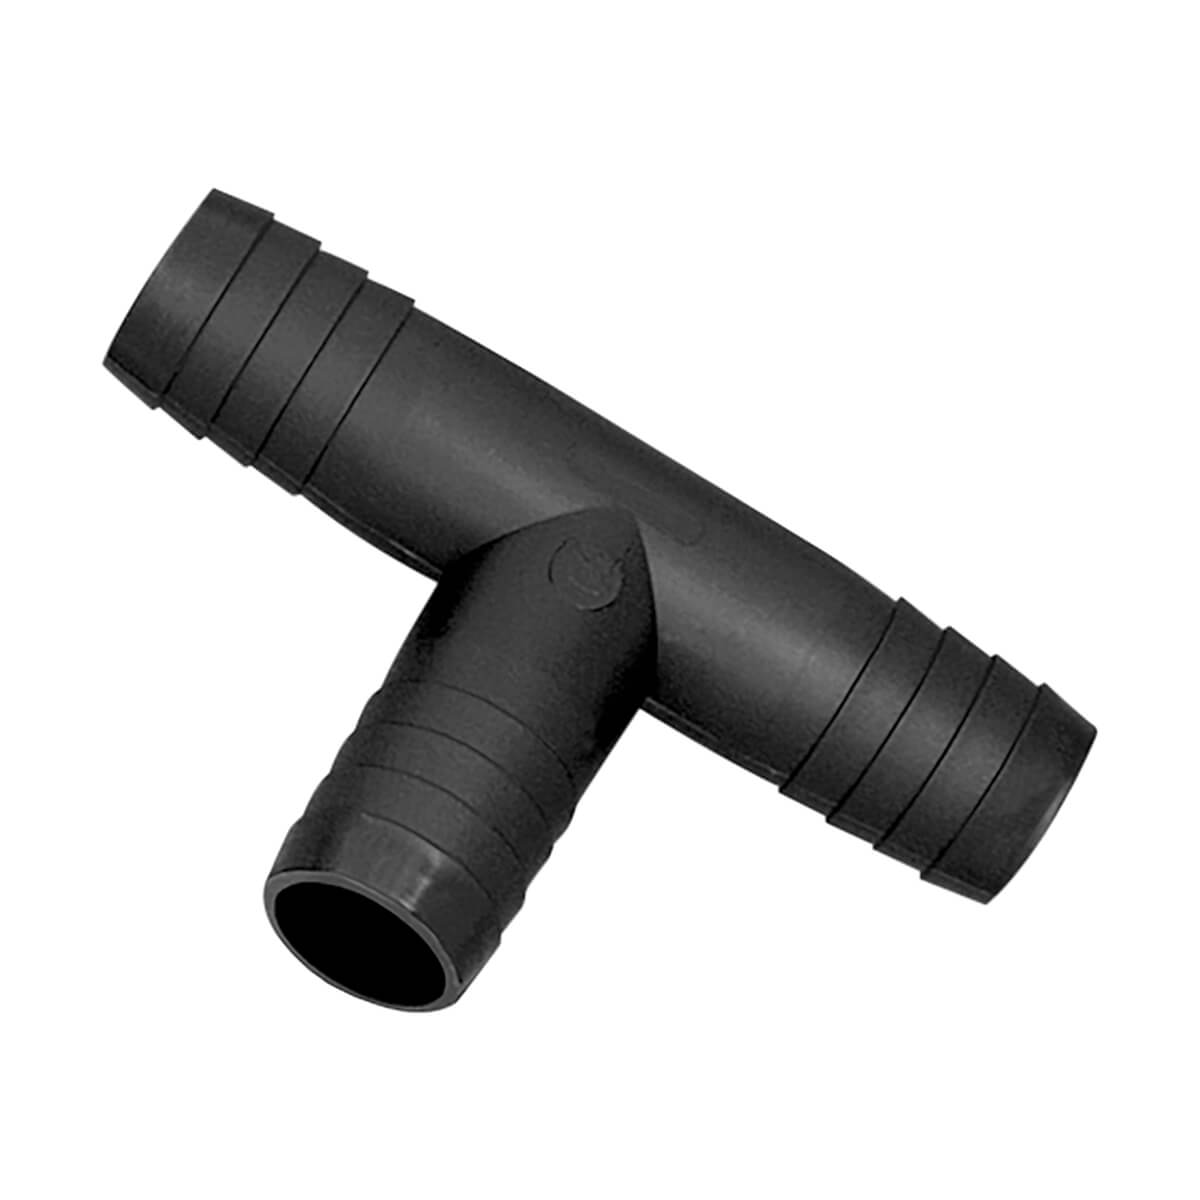 Insert Tee 1/4-in Hose Barb